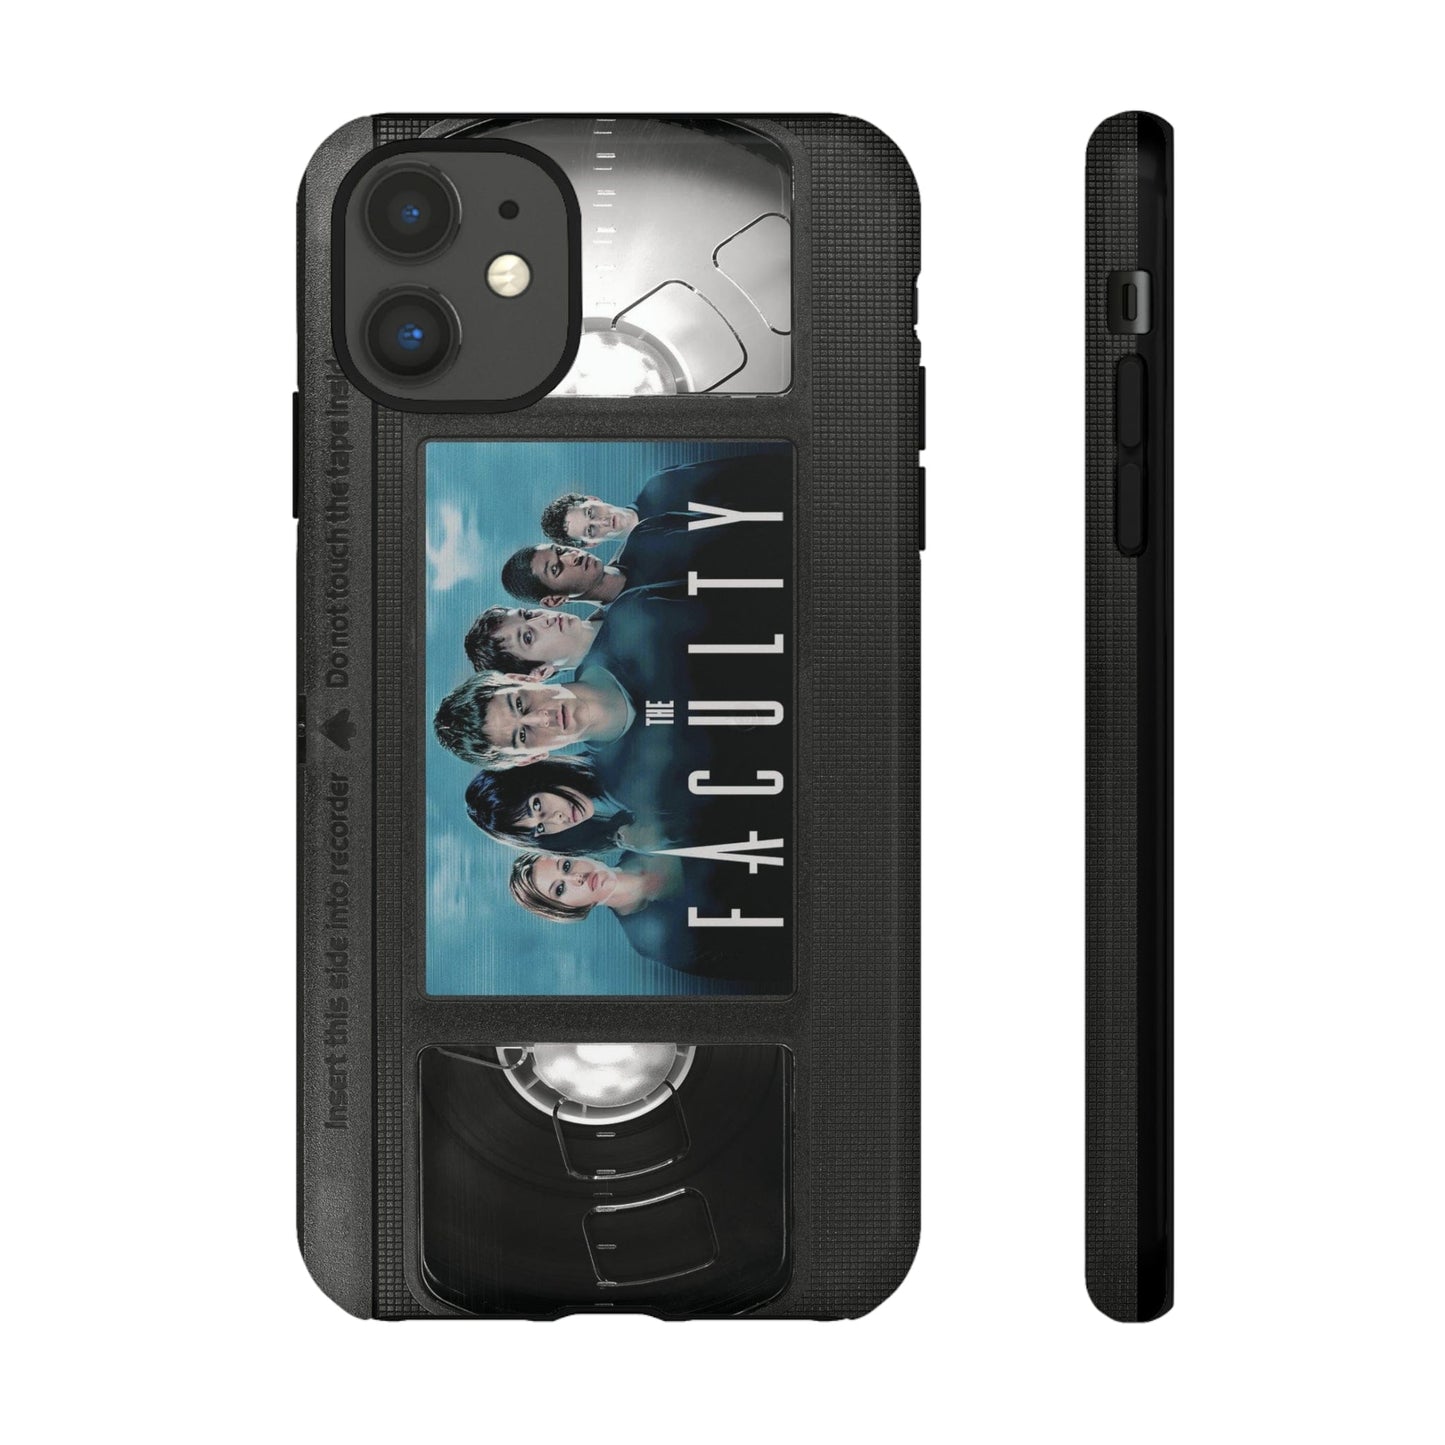 Faculty Impact Resistant VHS Phone Case